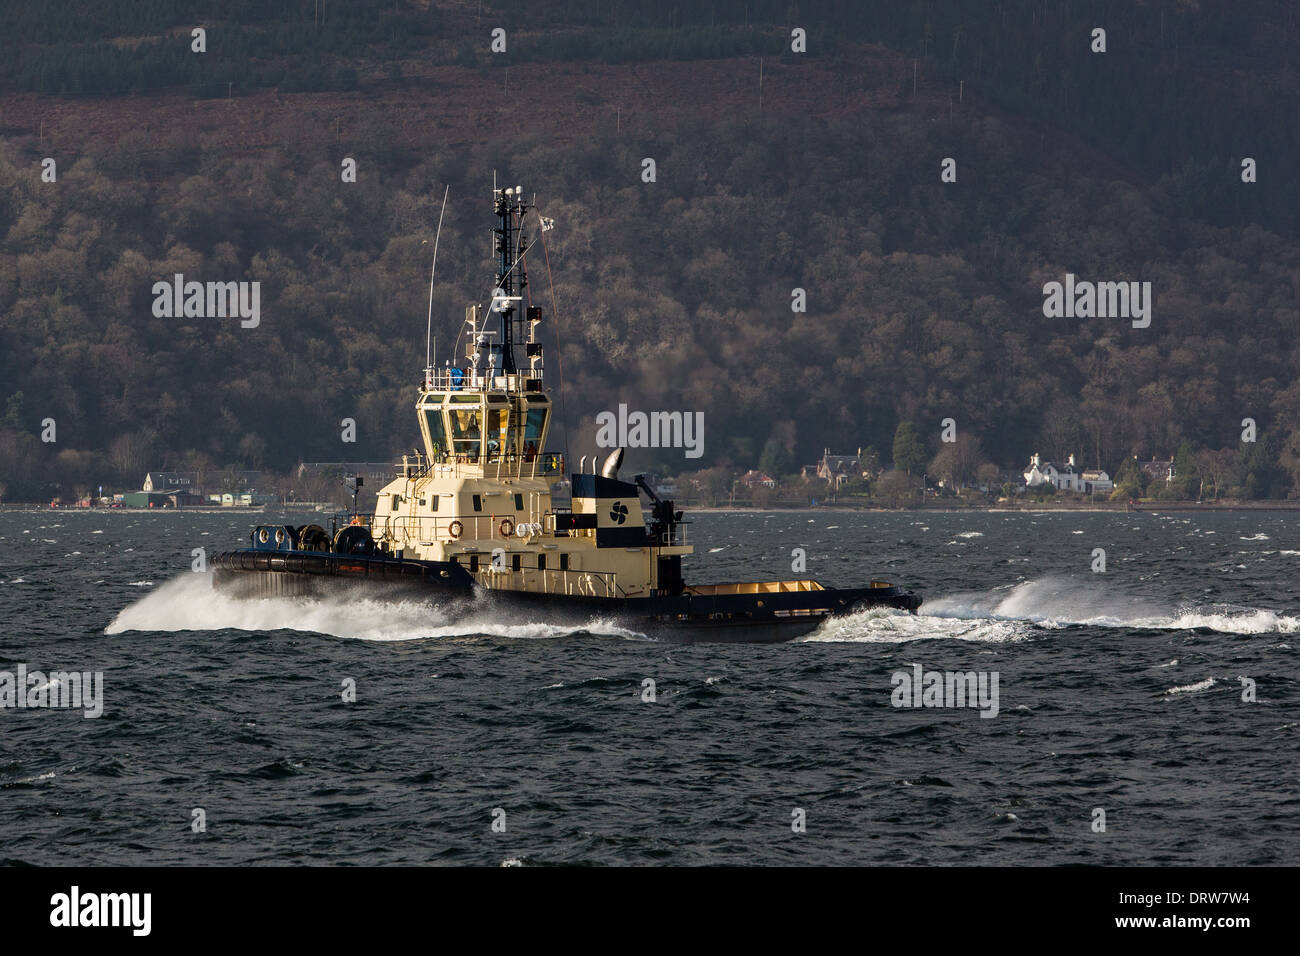 Ayton Cross fighting her way on the River Clyde Stock Photo